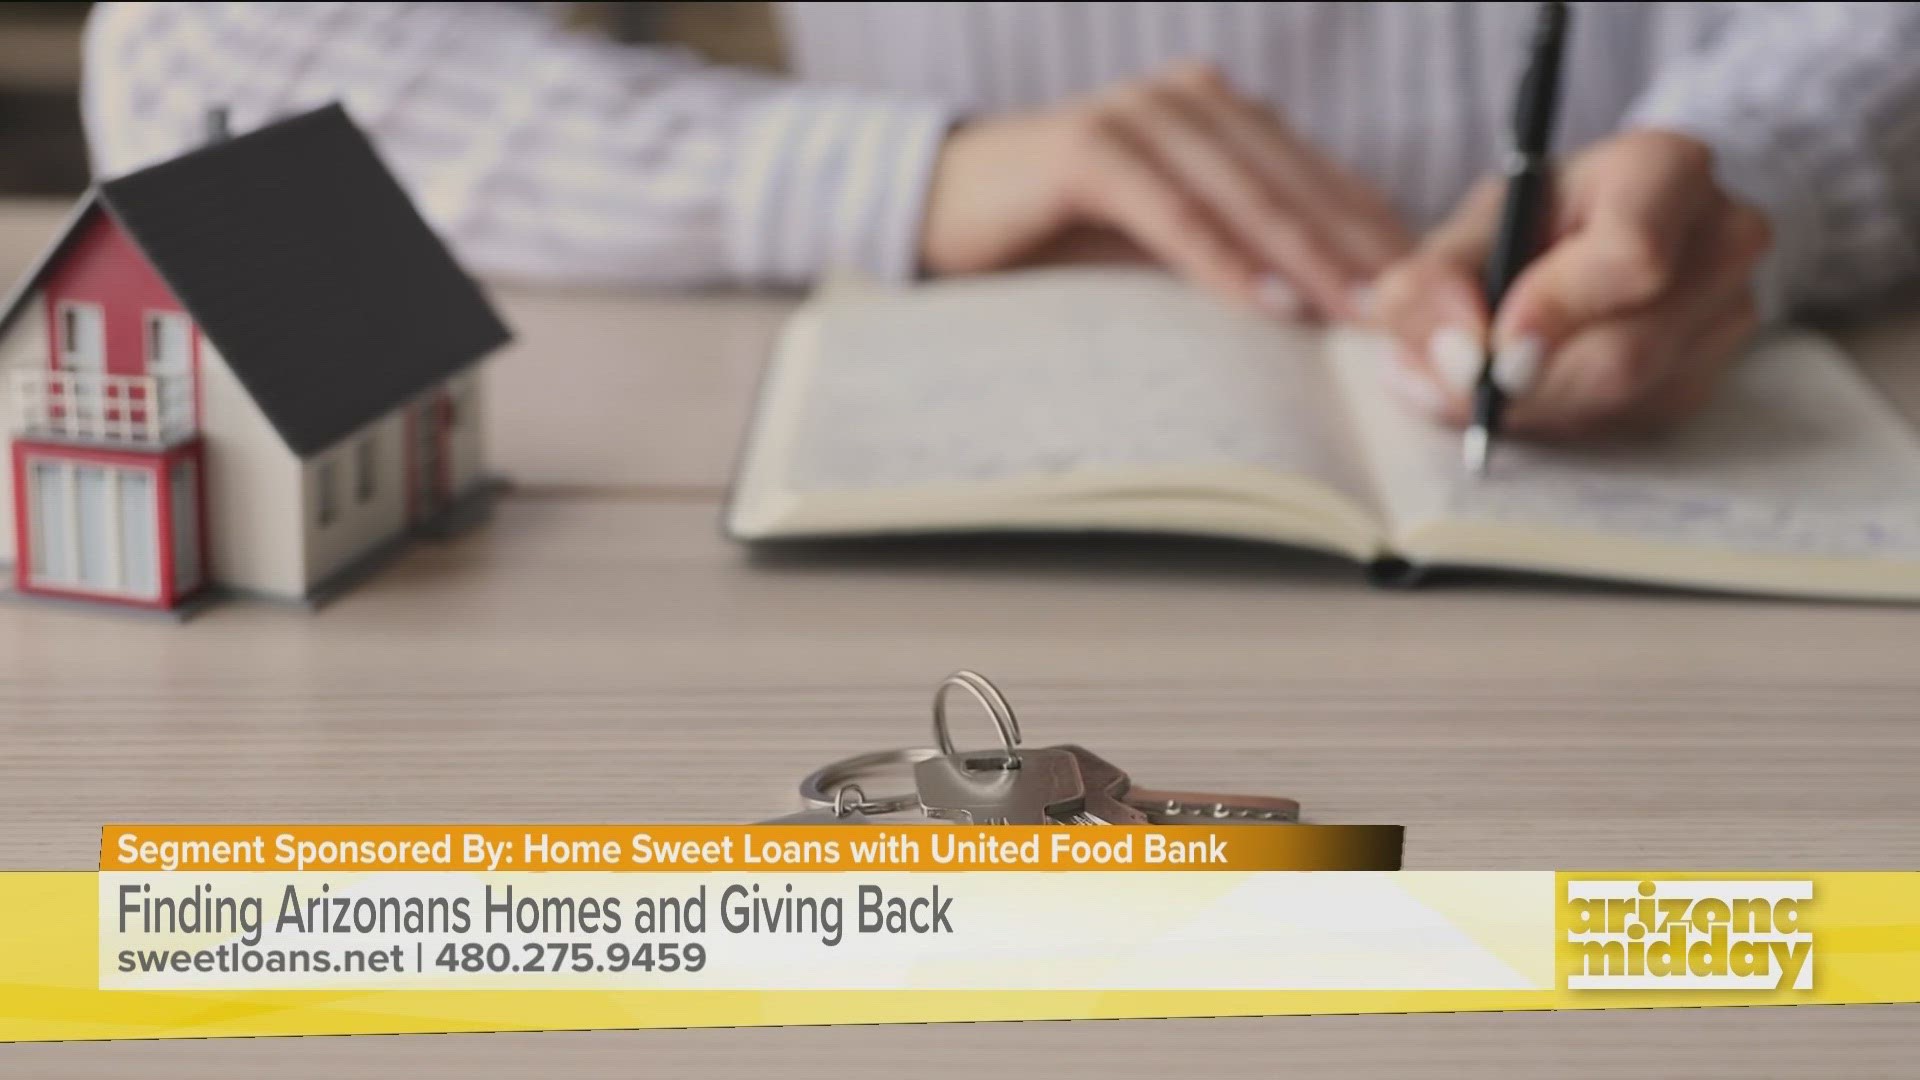 Christian Wohl with Home Sweet Loans talks about his partnership with United Food Bank and gives you expert home buying advice.